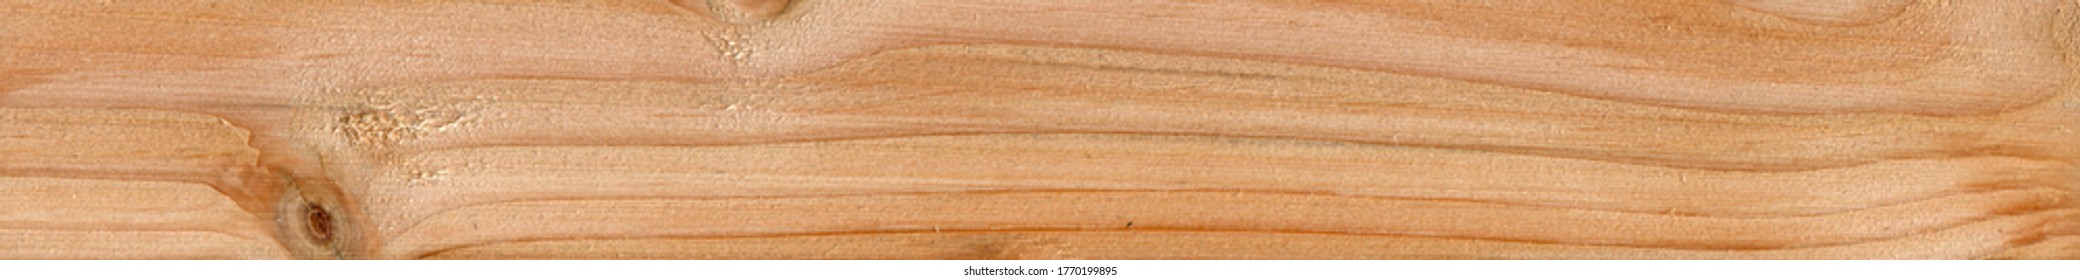 Wood grain texture. Pine wood, can be used as background, pattern background